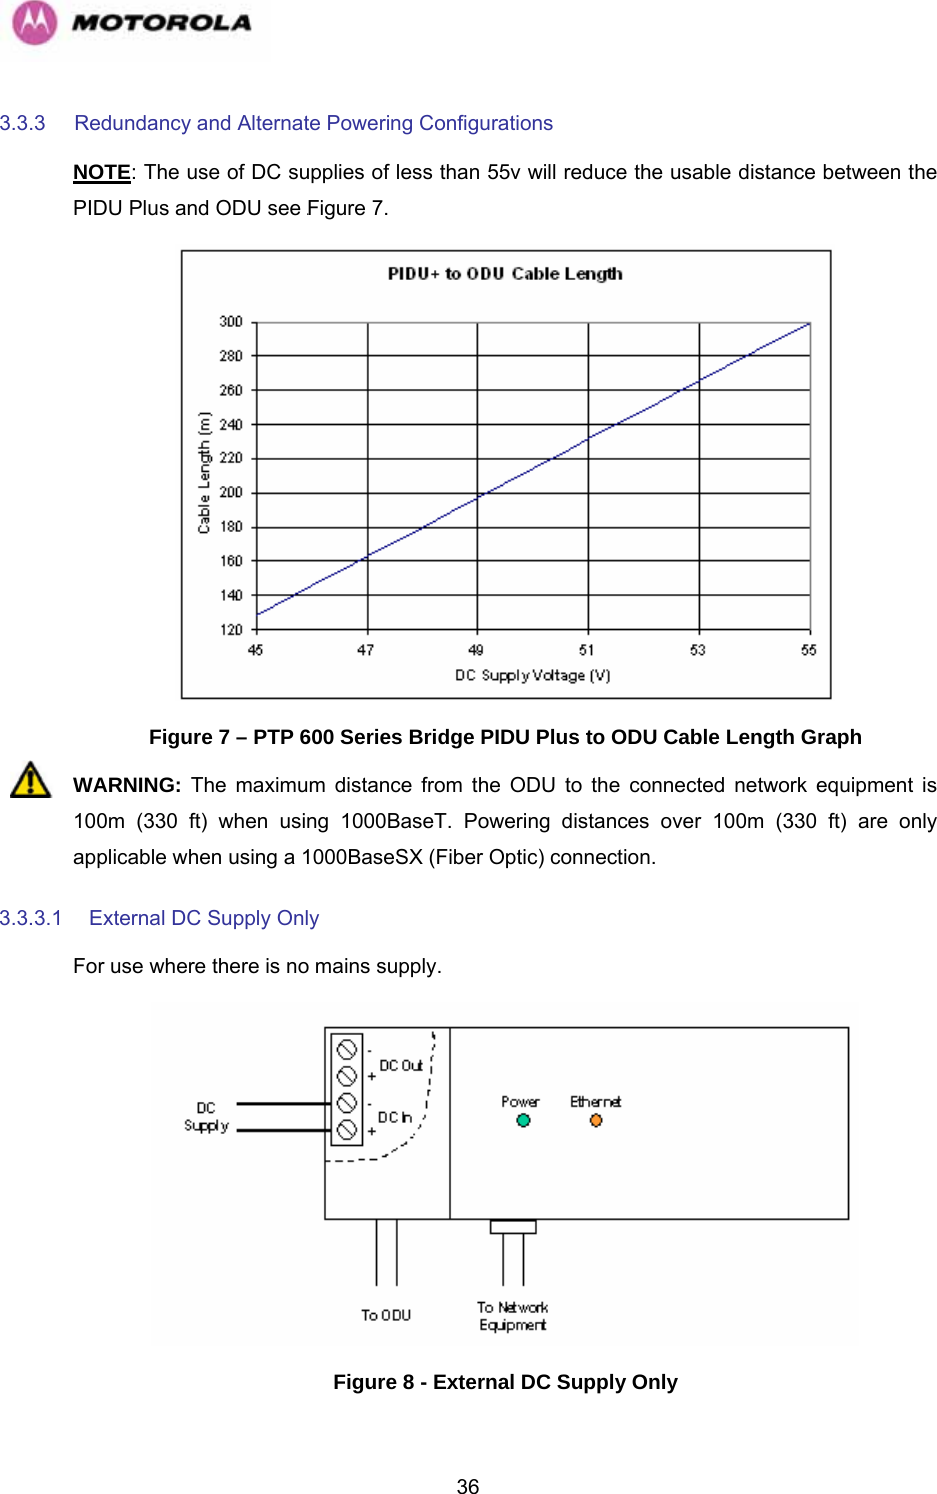   363.3.3  Redundancy and Alternate Powering Configurations NOTE: The use of DC supplies of less than 55v will reduce the usable distance between the PIDU Plus and ODU see 976HFigure 7.  Figure 7 – PTP 600 Series Bridge PIDU Plus to ODU Cable Length Graph WARNING: The maximum distance from the ODU to the connected network equipment is 100m (330 ft) when using 1000BaseT. Powering distances over 100m (330 ft) are only applicable when using a 1000BaseSX (Fiber Optic) connection. 3.3.3.1  External DC Supply Only For use where there is no mains supply.  Figure 8 - External DC Supply Only 